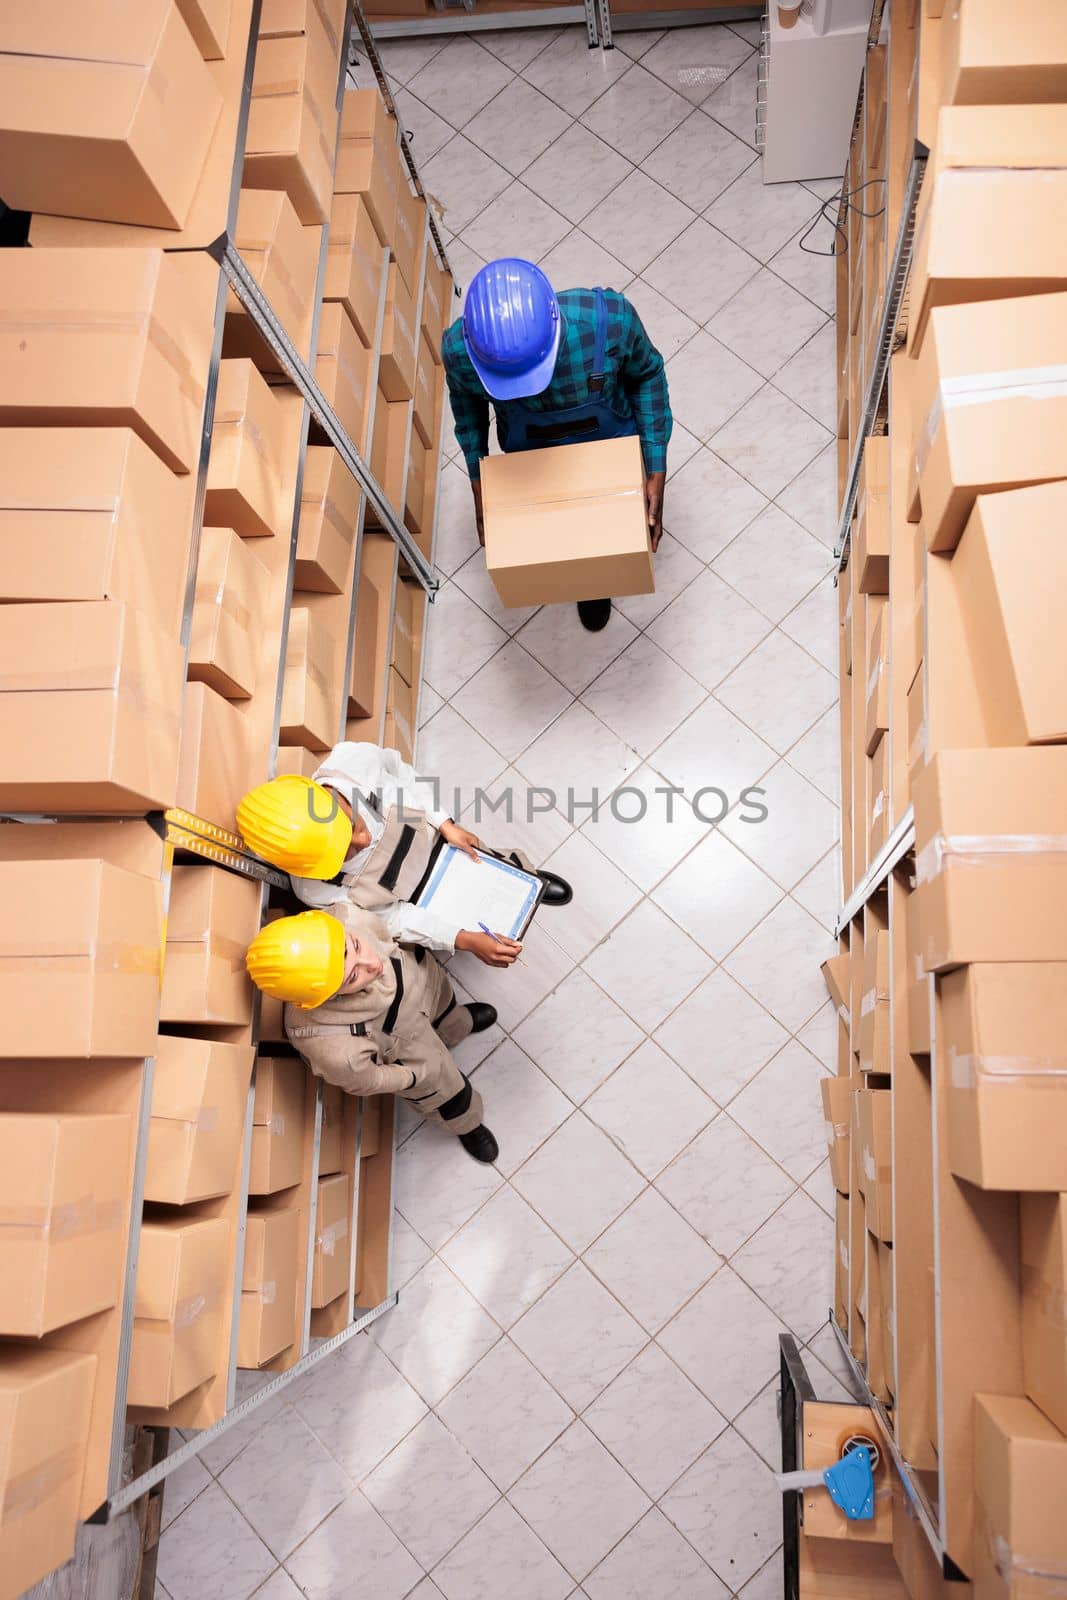 Warehouse employees managing parcels receiving, carrying cardboard box by DCStudio